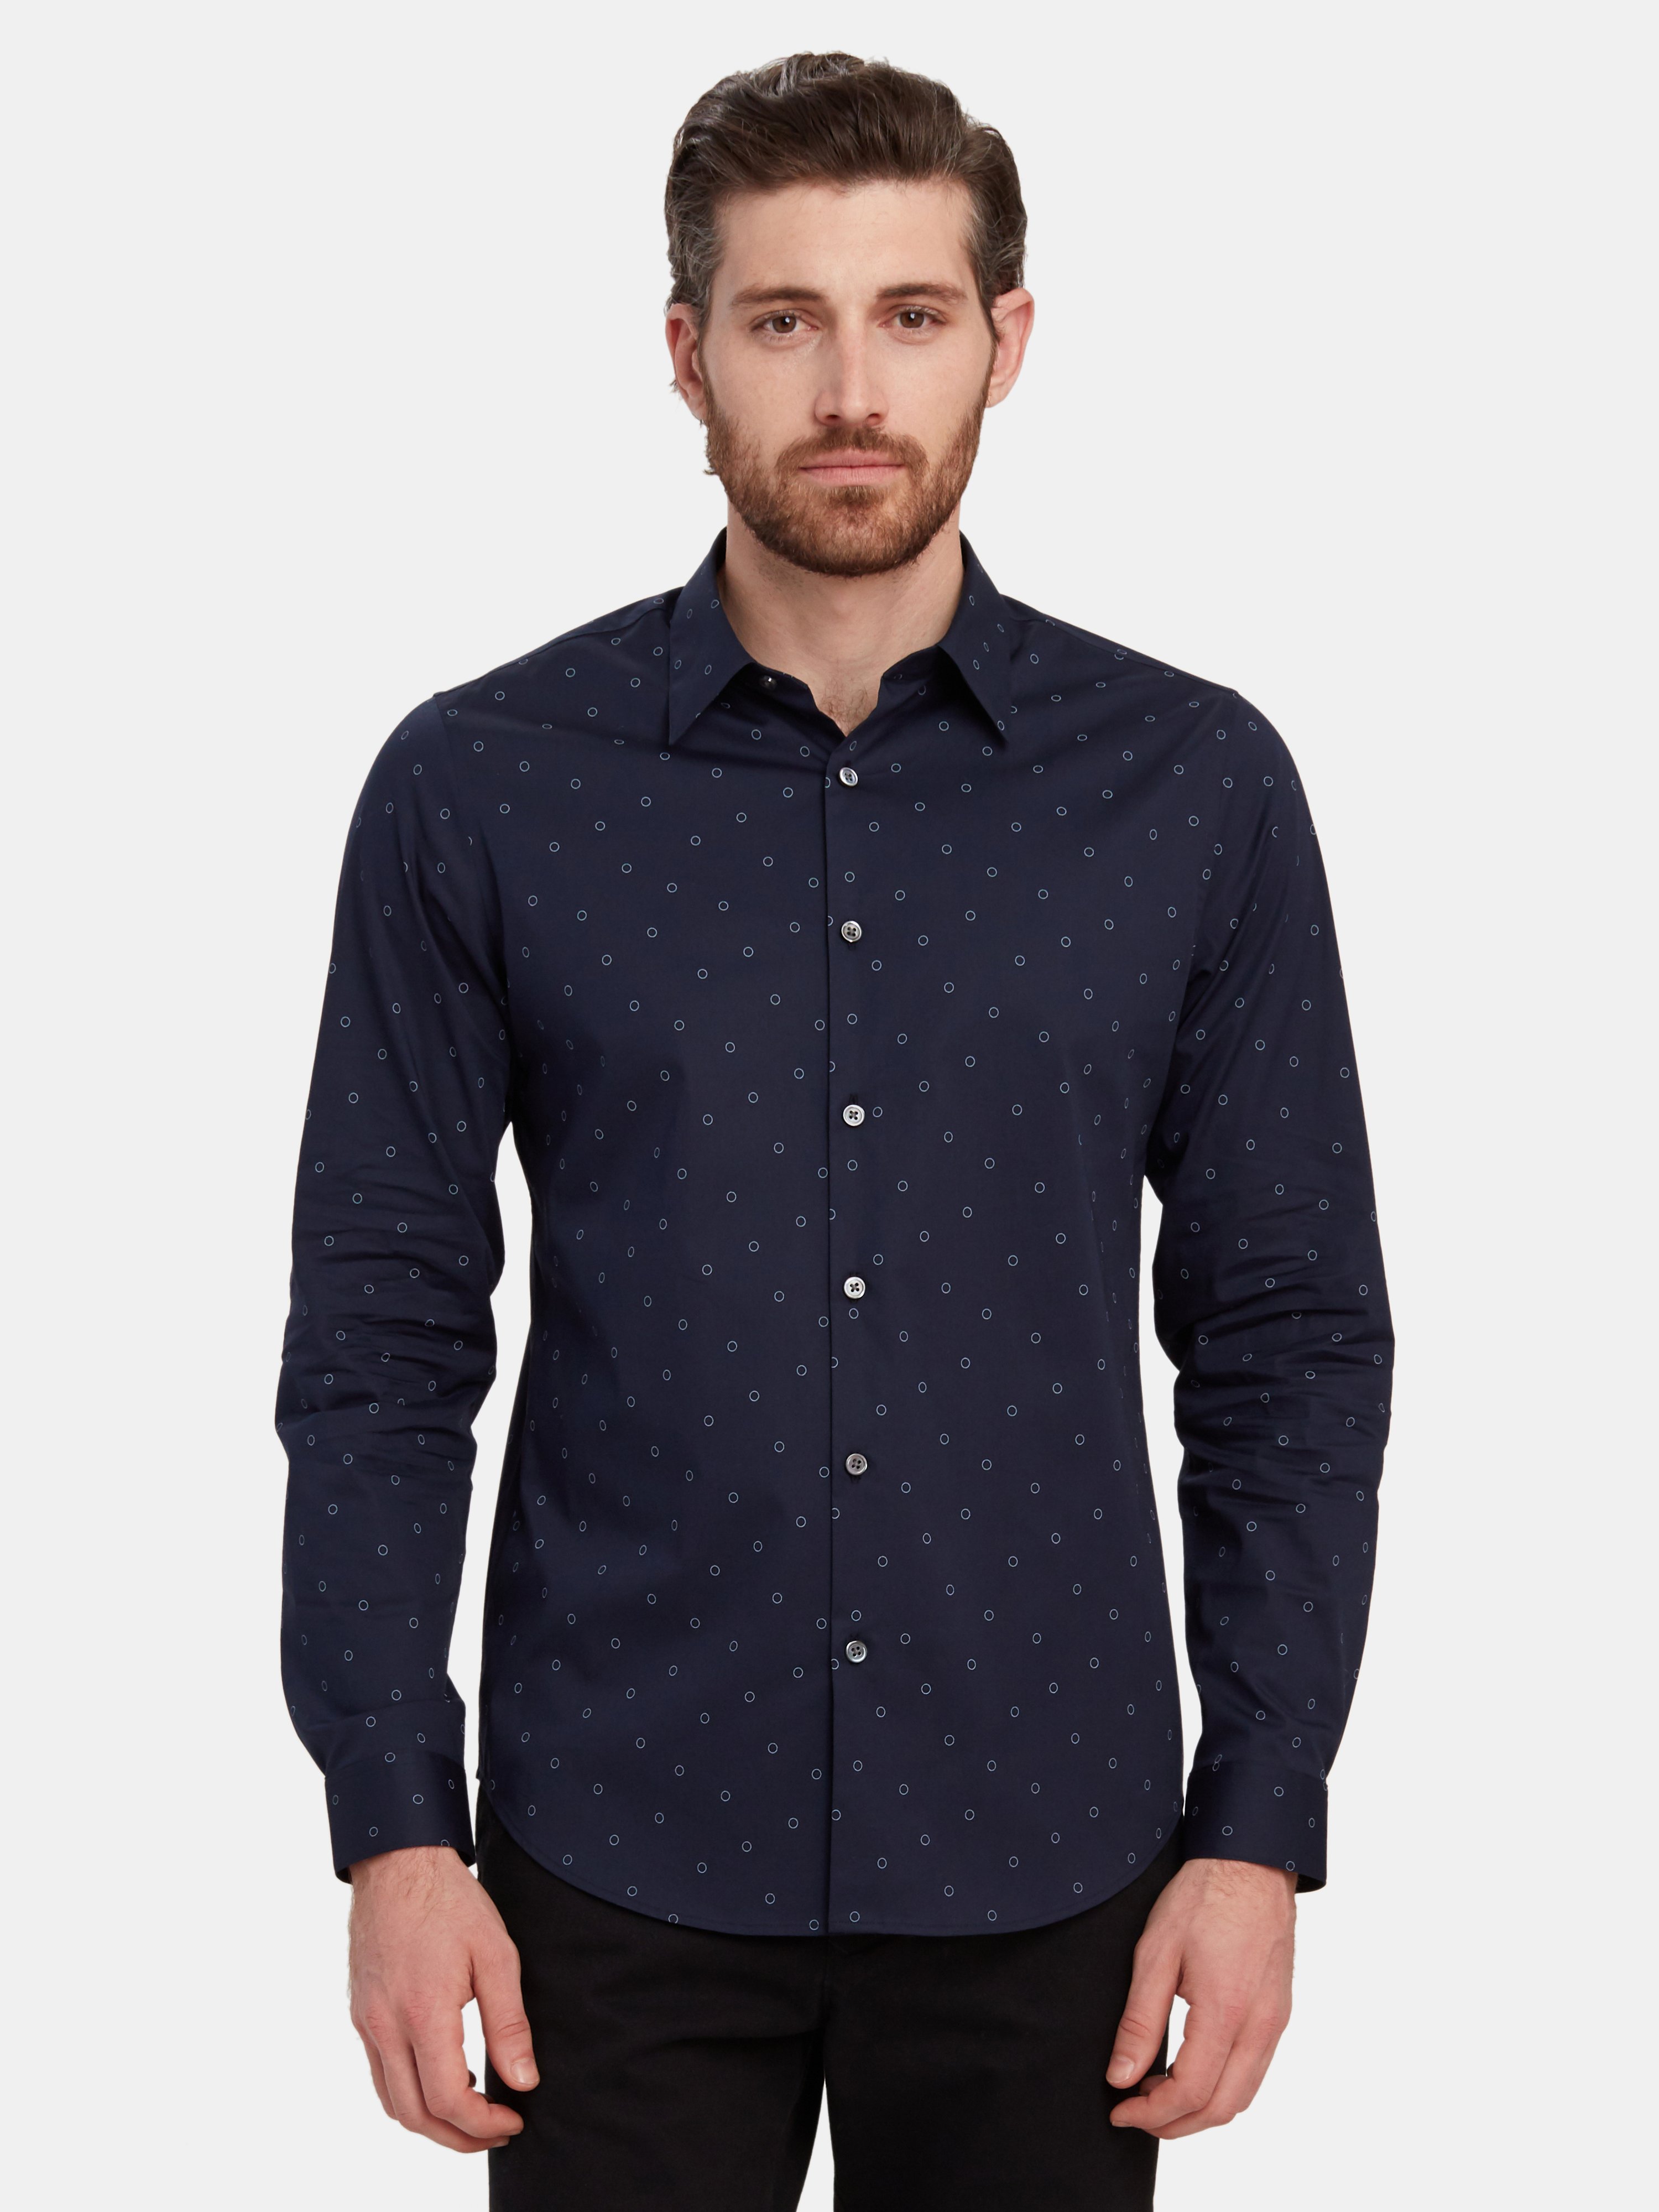 THEORY THEORY IRVING LONG SLEEVE BUTTON DOWN SHIRT